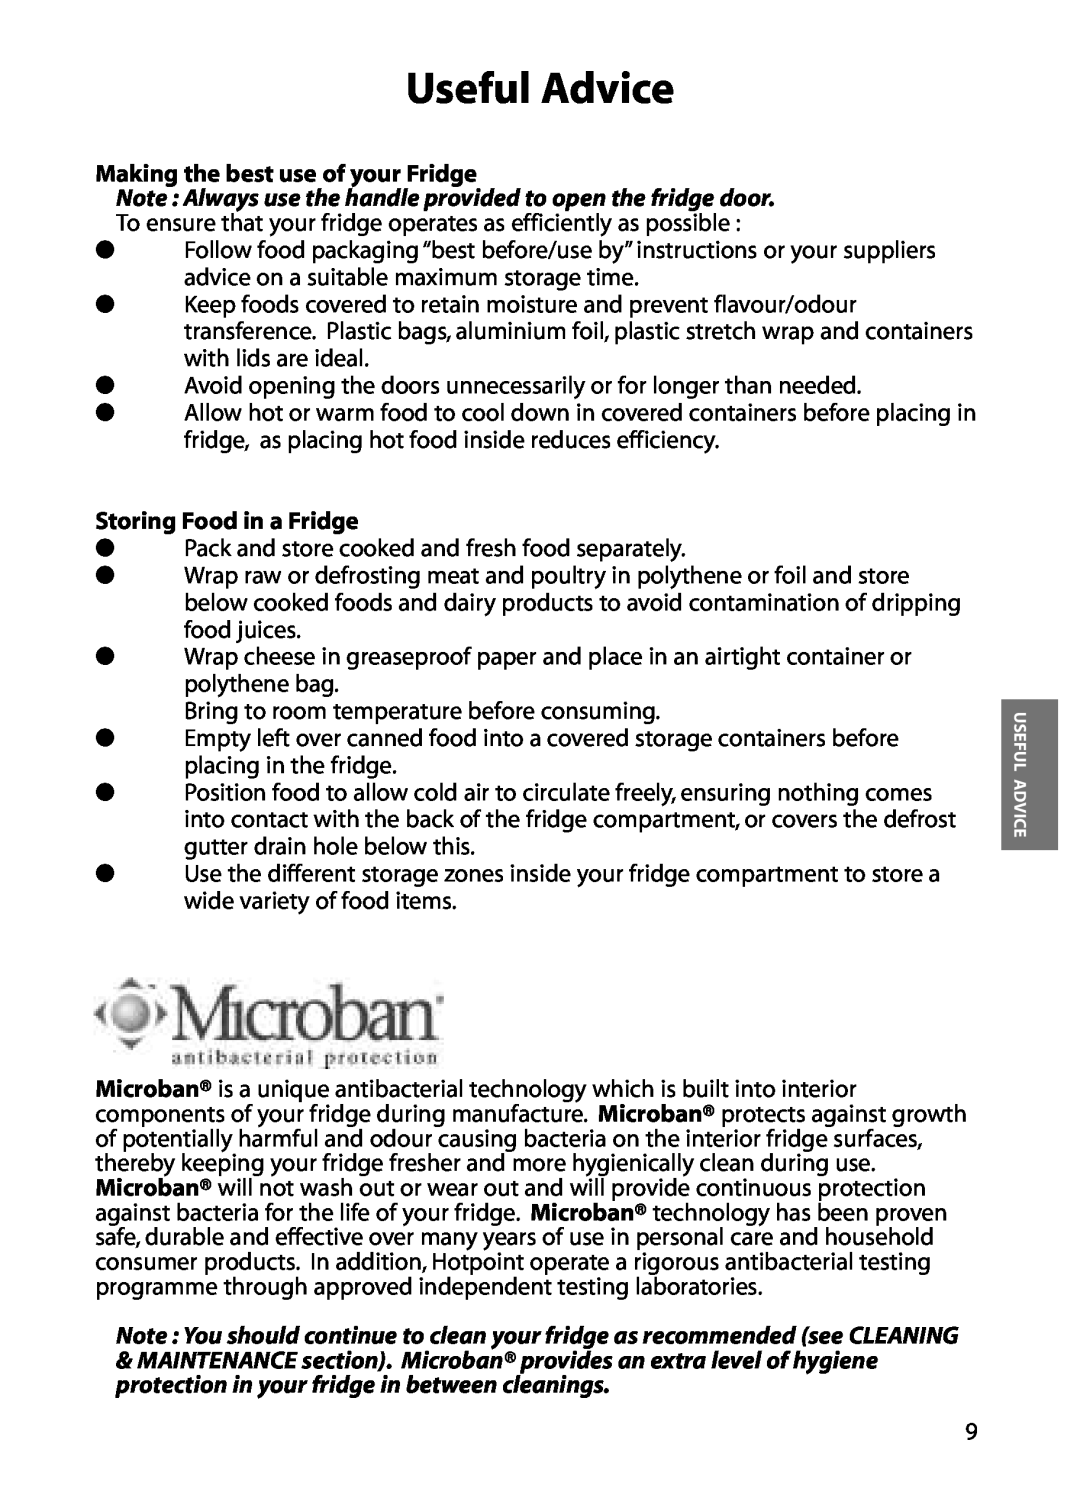 Hotpoint RLM81, RLA81 manual Useful Advice, Making the best use of your Fridge, Storing Food in a Fridge 